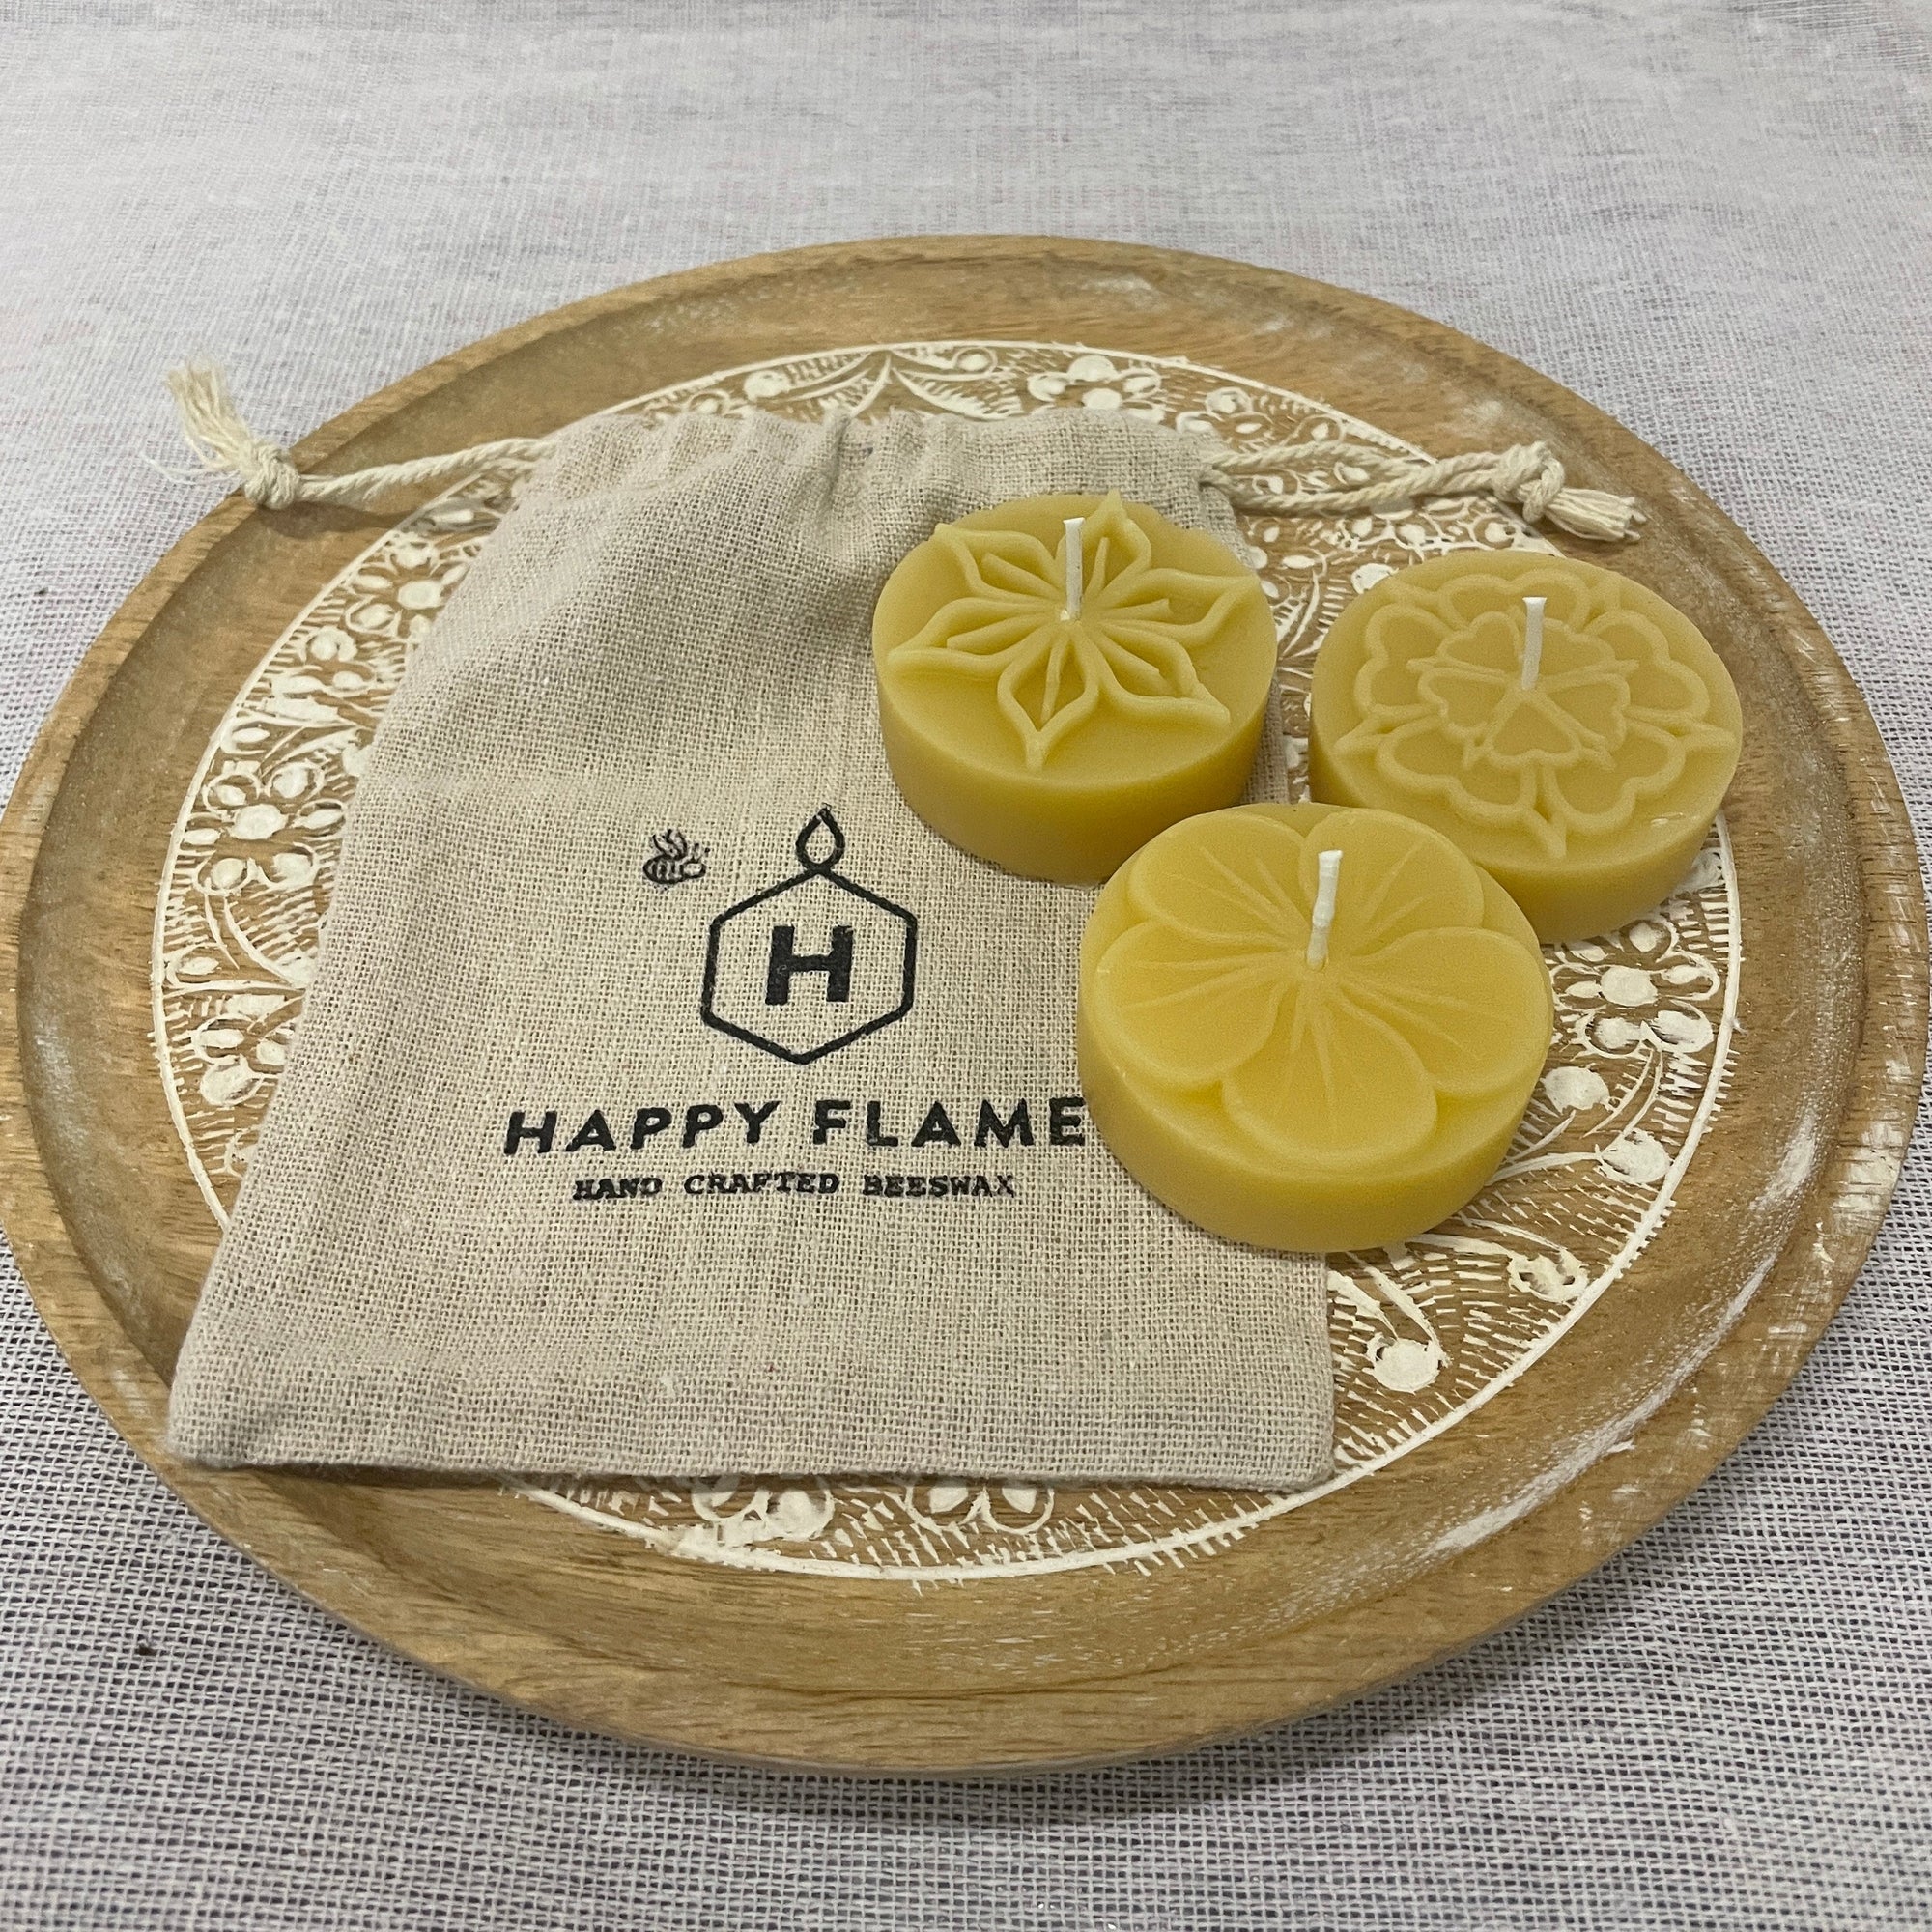 Set of 3 x Embossed Meditation candles- Made from 100% Australian Beeswax Happy Flame 